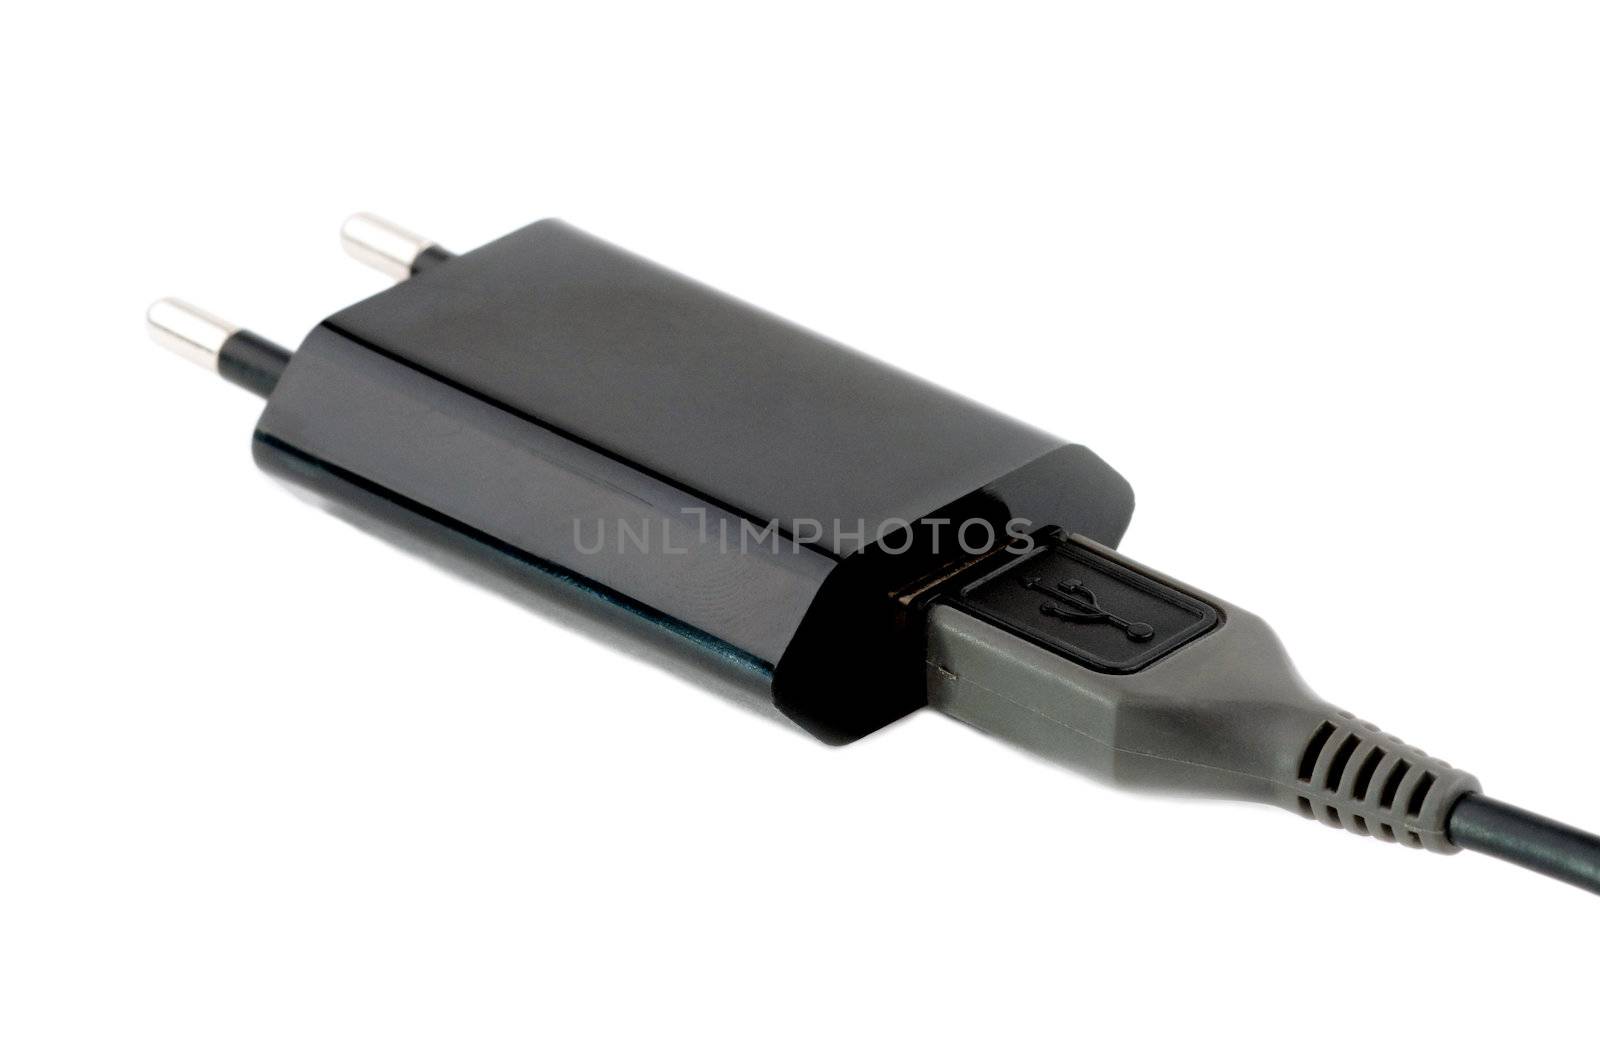 Black USB charger device with USB cable isolated on white